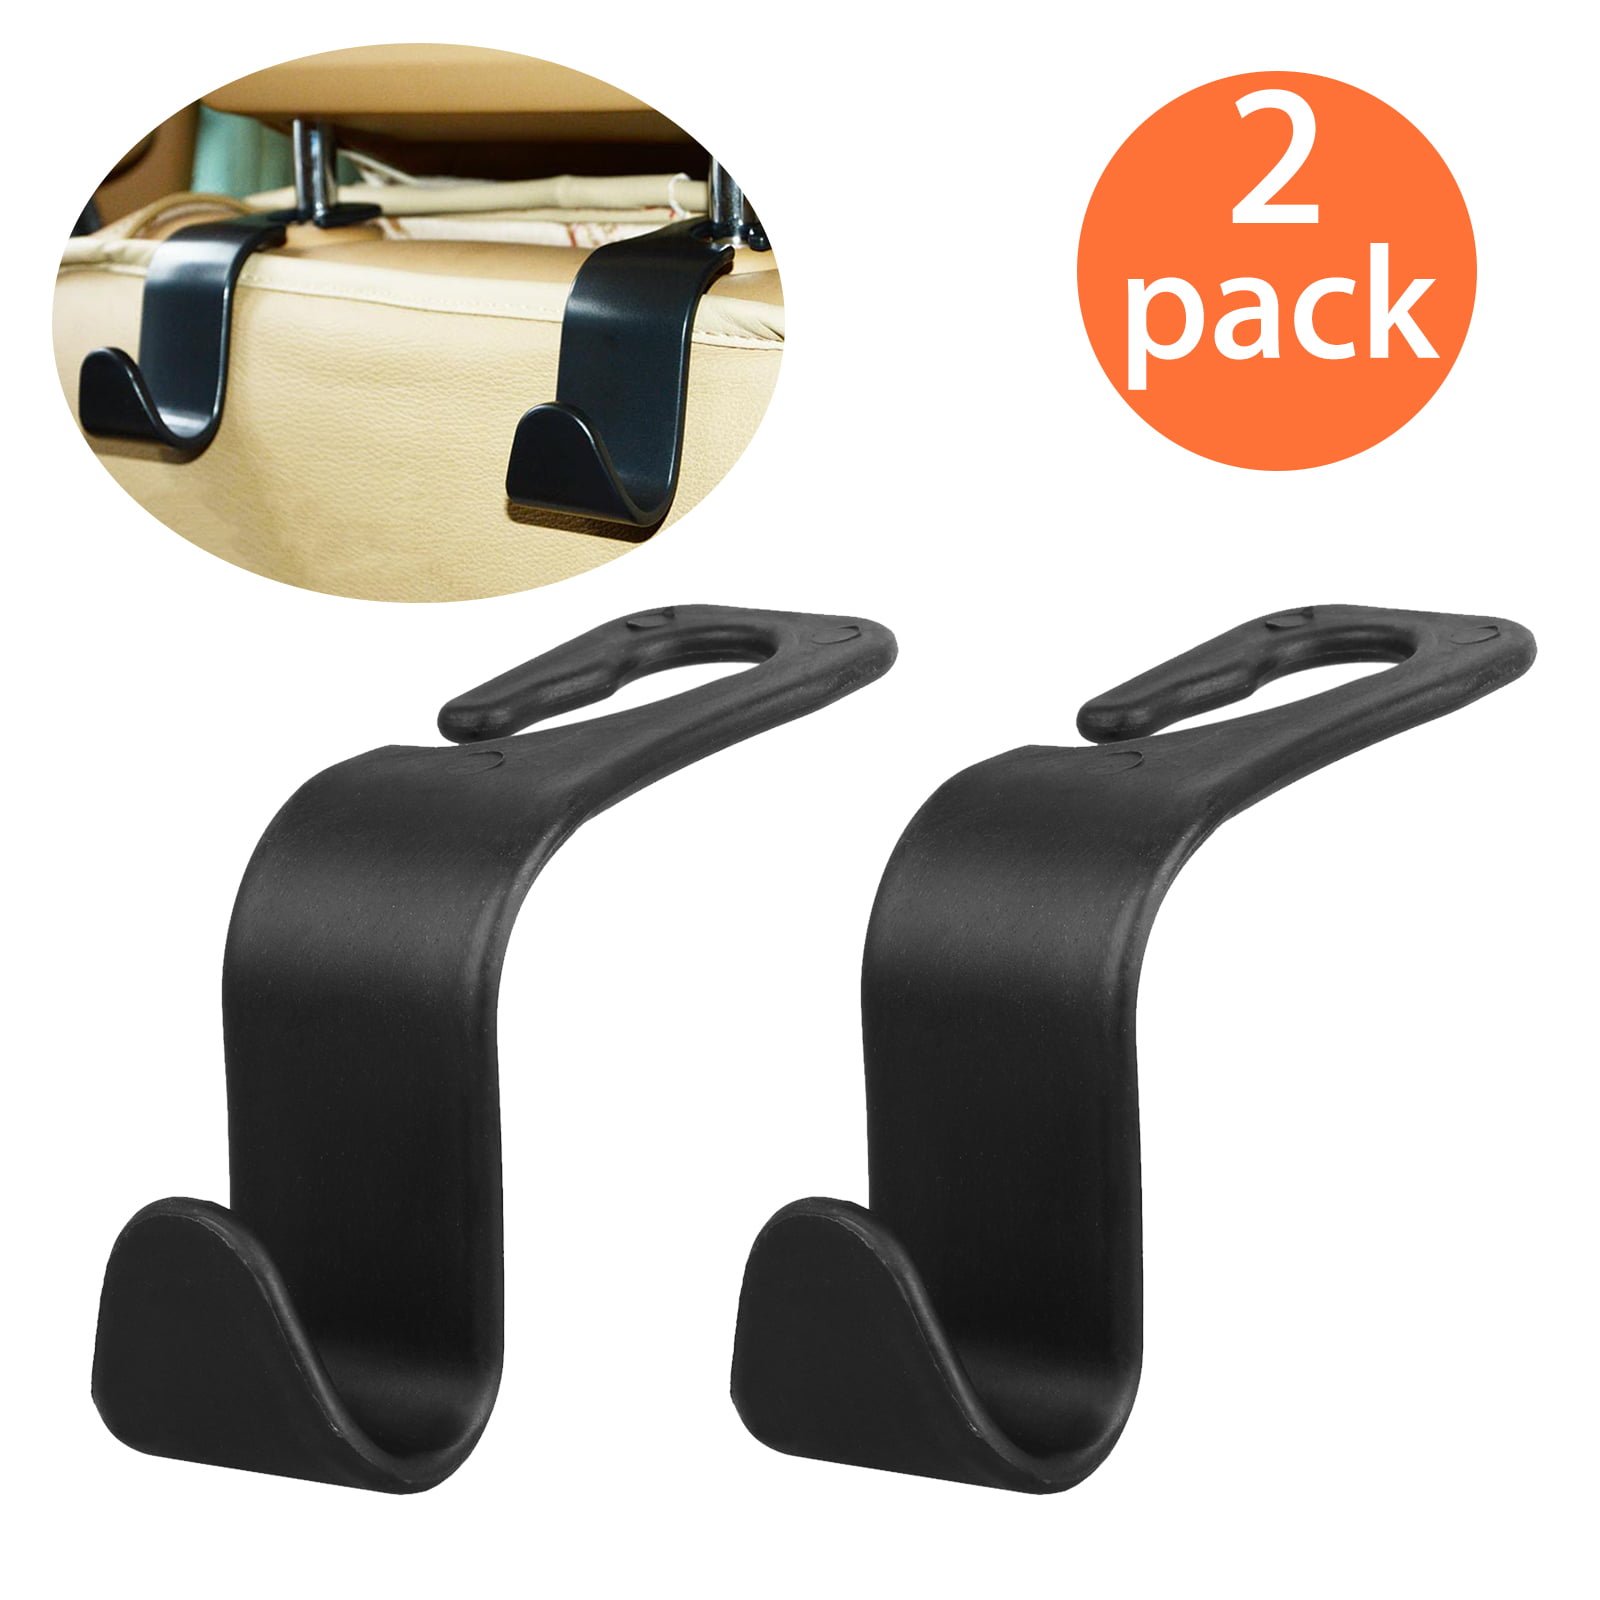 Car Seat Storage Organizer Hanger Holder Hook for Purses and Bags Purse Holder for Car Fits Universal Vehicle Car Seat Headrest Hooks AstroAI Car Hooks 2 Pack 